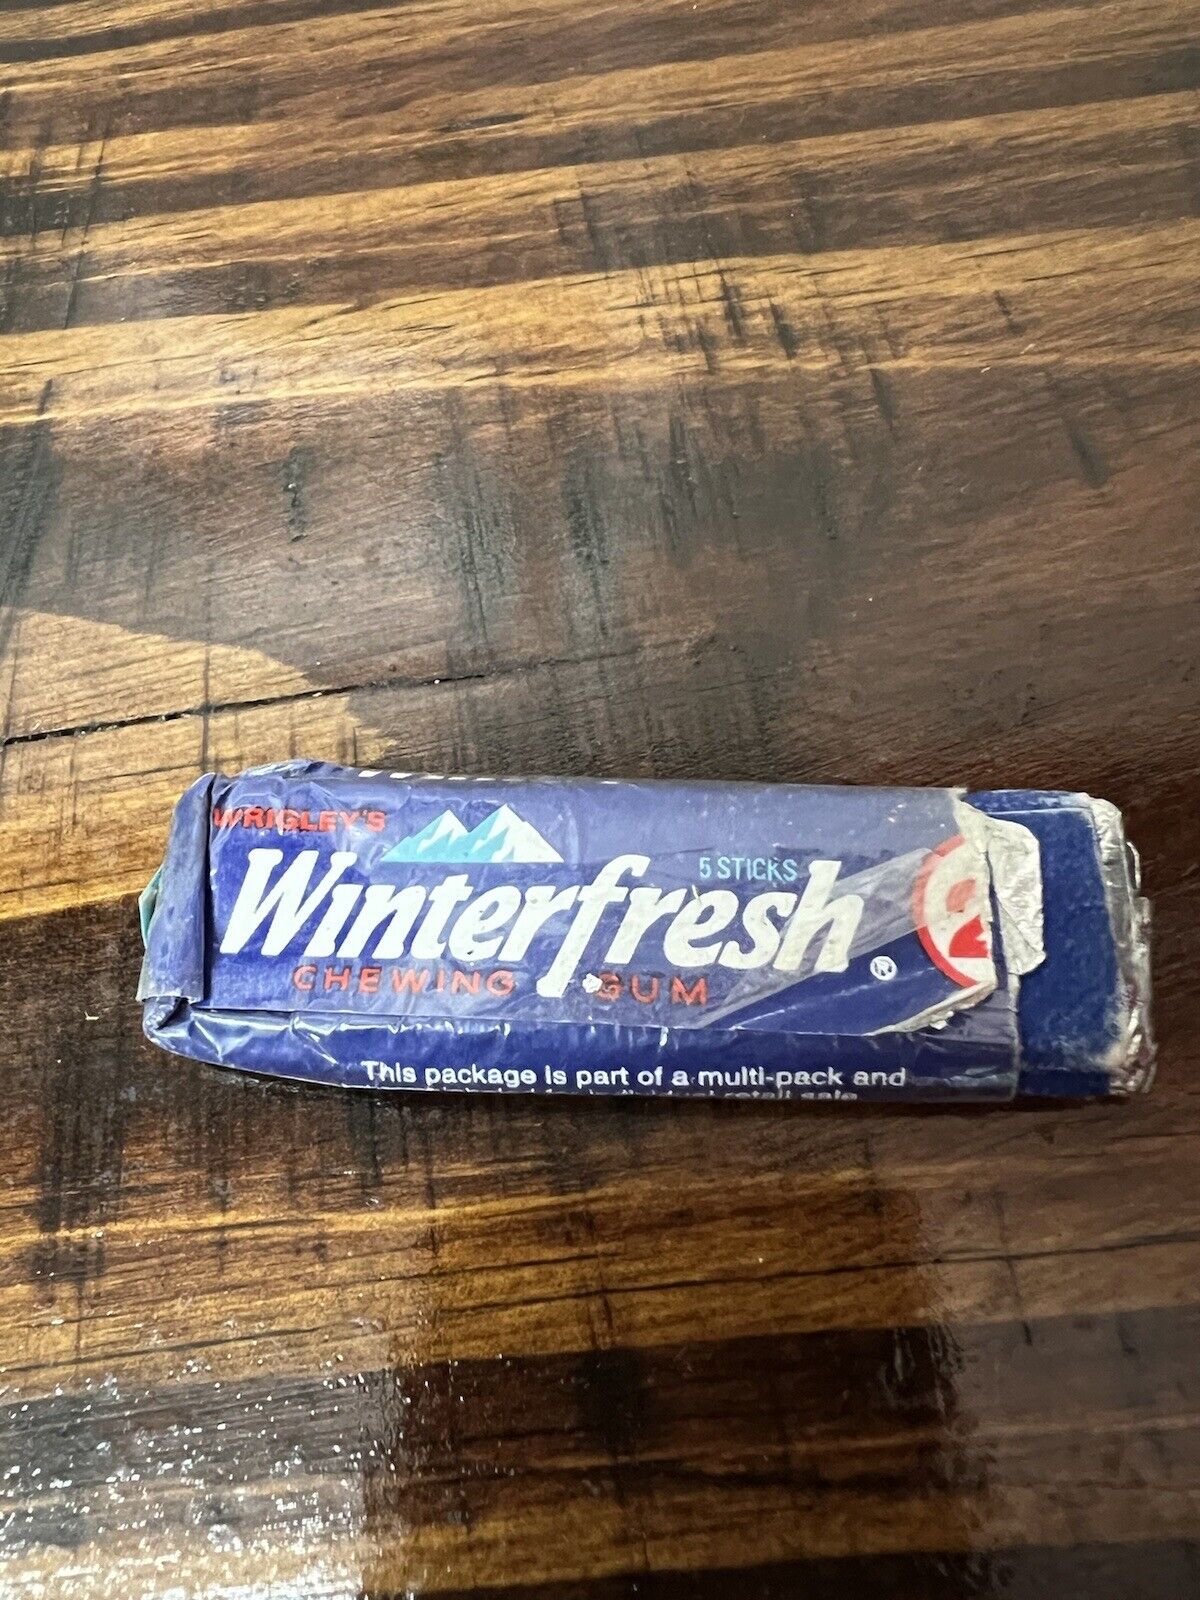 VTG Winterfresh Gum Wrapper Packaging Prop Memento 25 Cents Wrigley’s Chewing